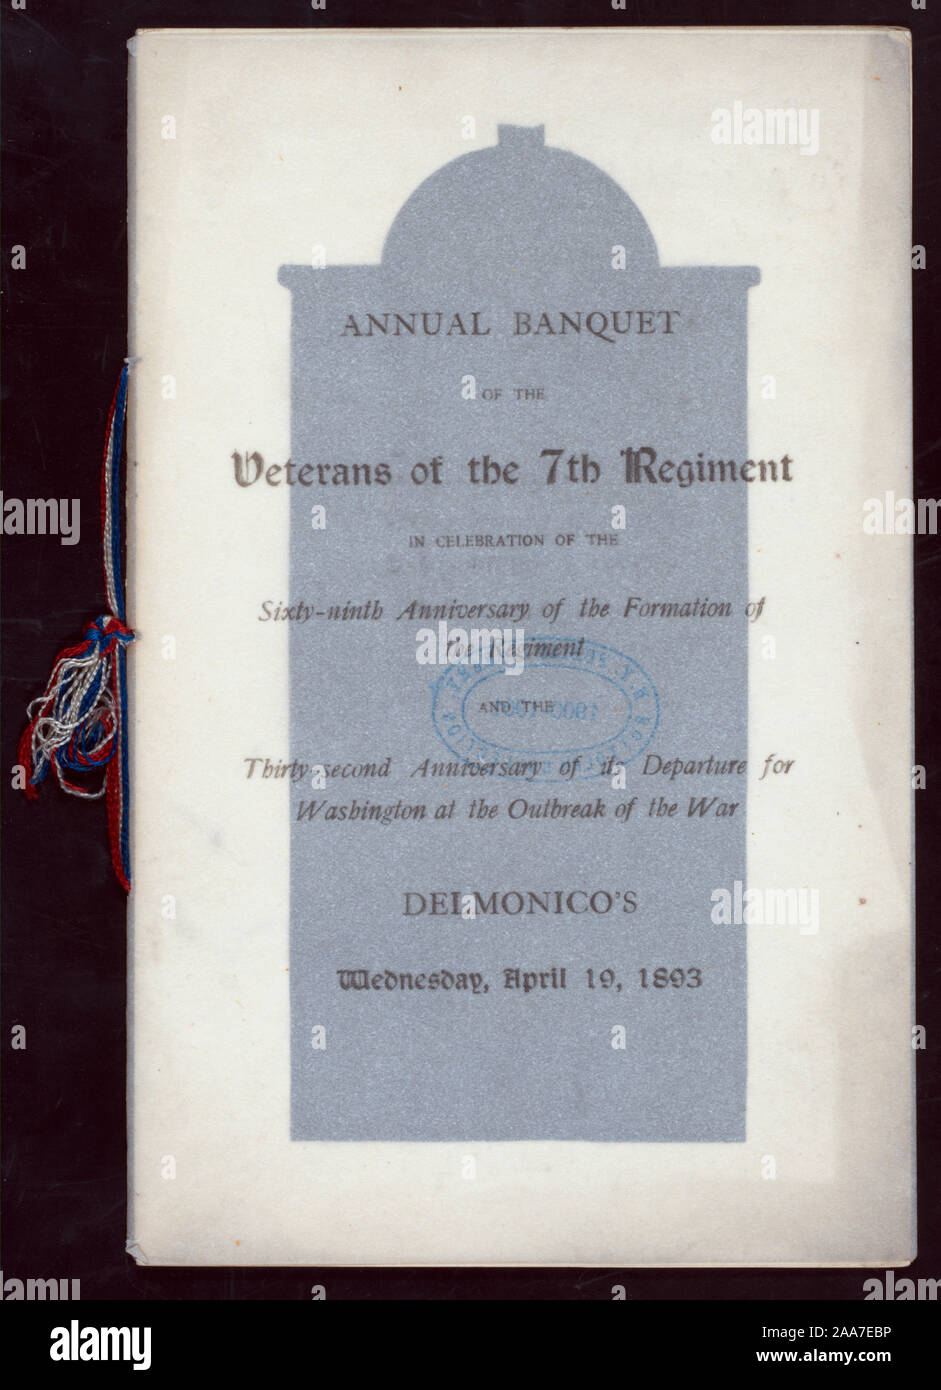 MARKER OF SITE OF ORGANIZATION OF THE 7TH REGIMENT REPRODUCED; MENU IN FRENCH; OUTER COVERS OF PARCHMNENT LIKE PAPER; FASTENED AT LEFT BY RED WHITE AND BLUE CORDS; CELEBRATION OF THE SIXTY-NINTH ANNIVERSARY OF THE FORMATION OF THE REGIMENT AND THE THIRTY -SECOND ANNIVERSARY OF ITS DEPARTURE FOR WASHINGTON AT THE OUTBREAK OF THE WAR [held by] VETERANS OF THE 7TH REGIMENT [at] DELMONICO'S, NEW YORK, NY (REST;) Stock Photo